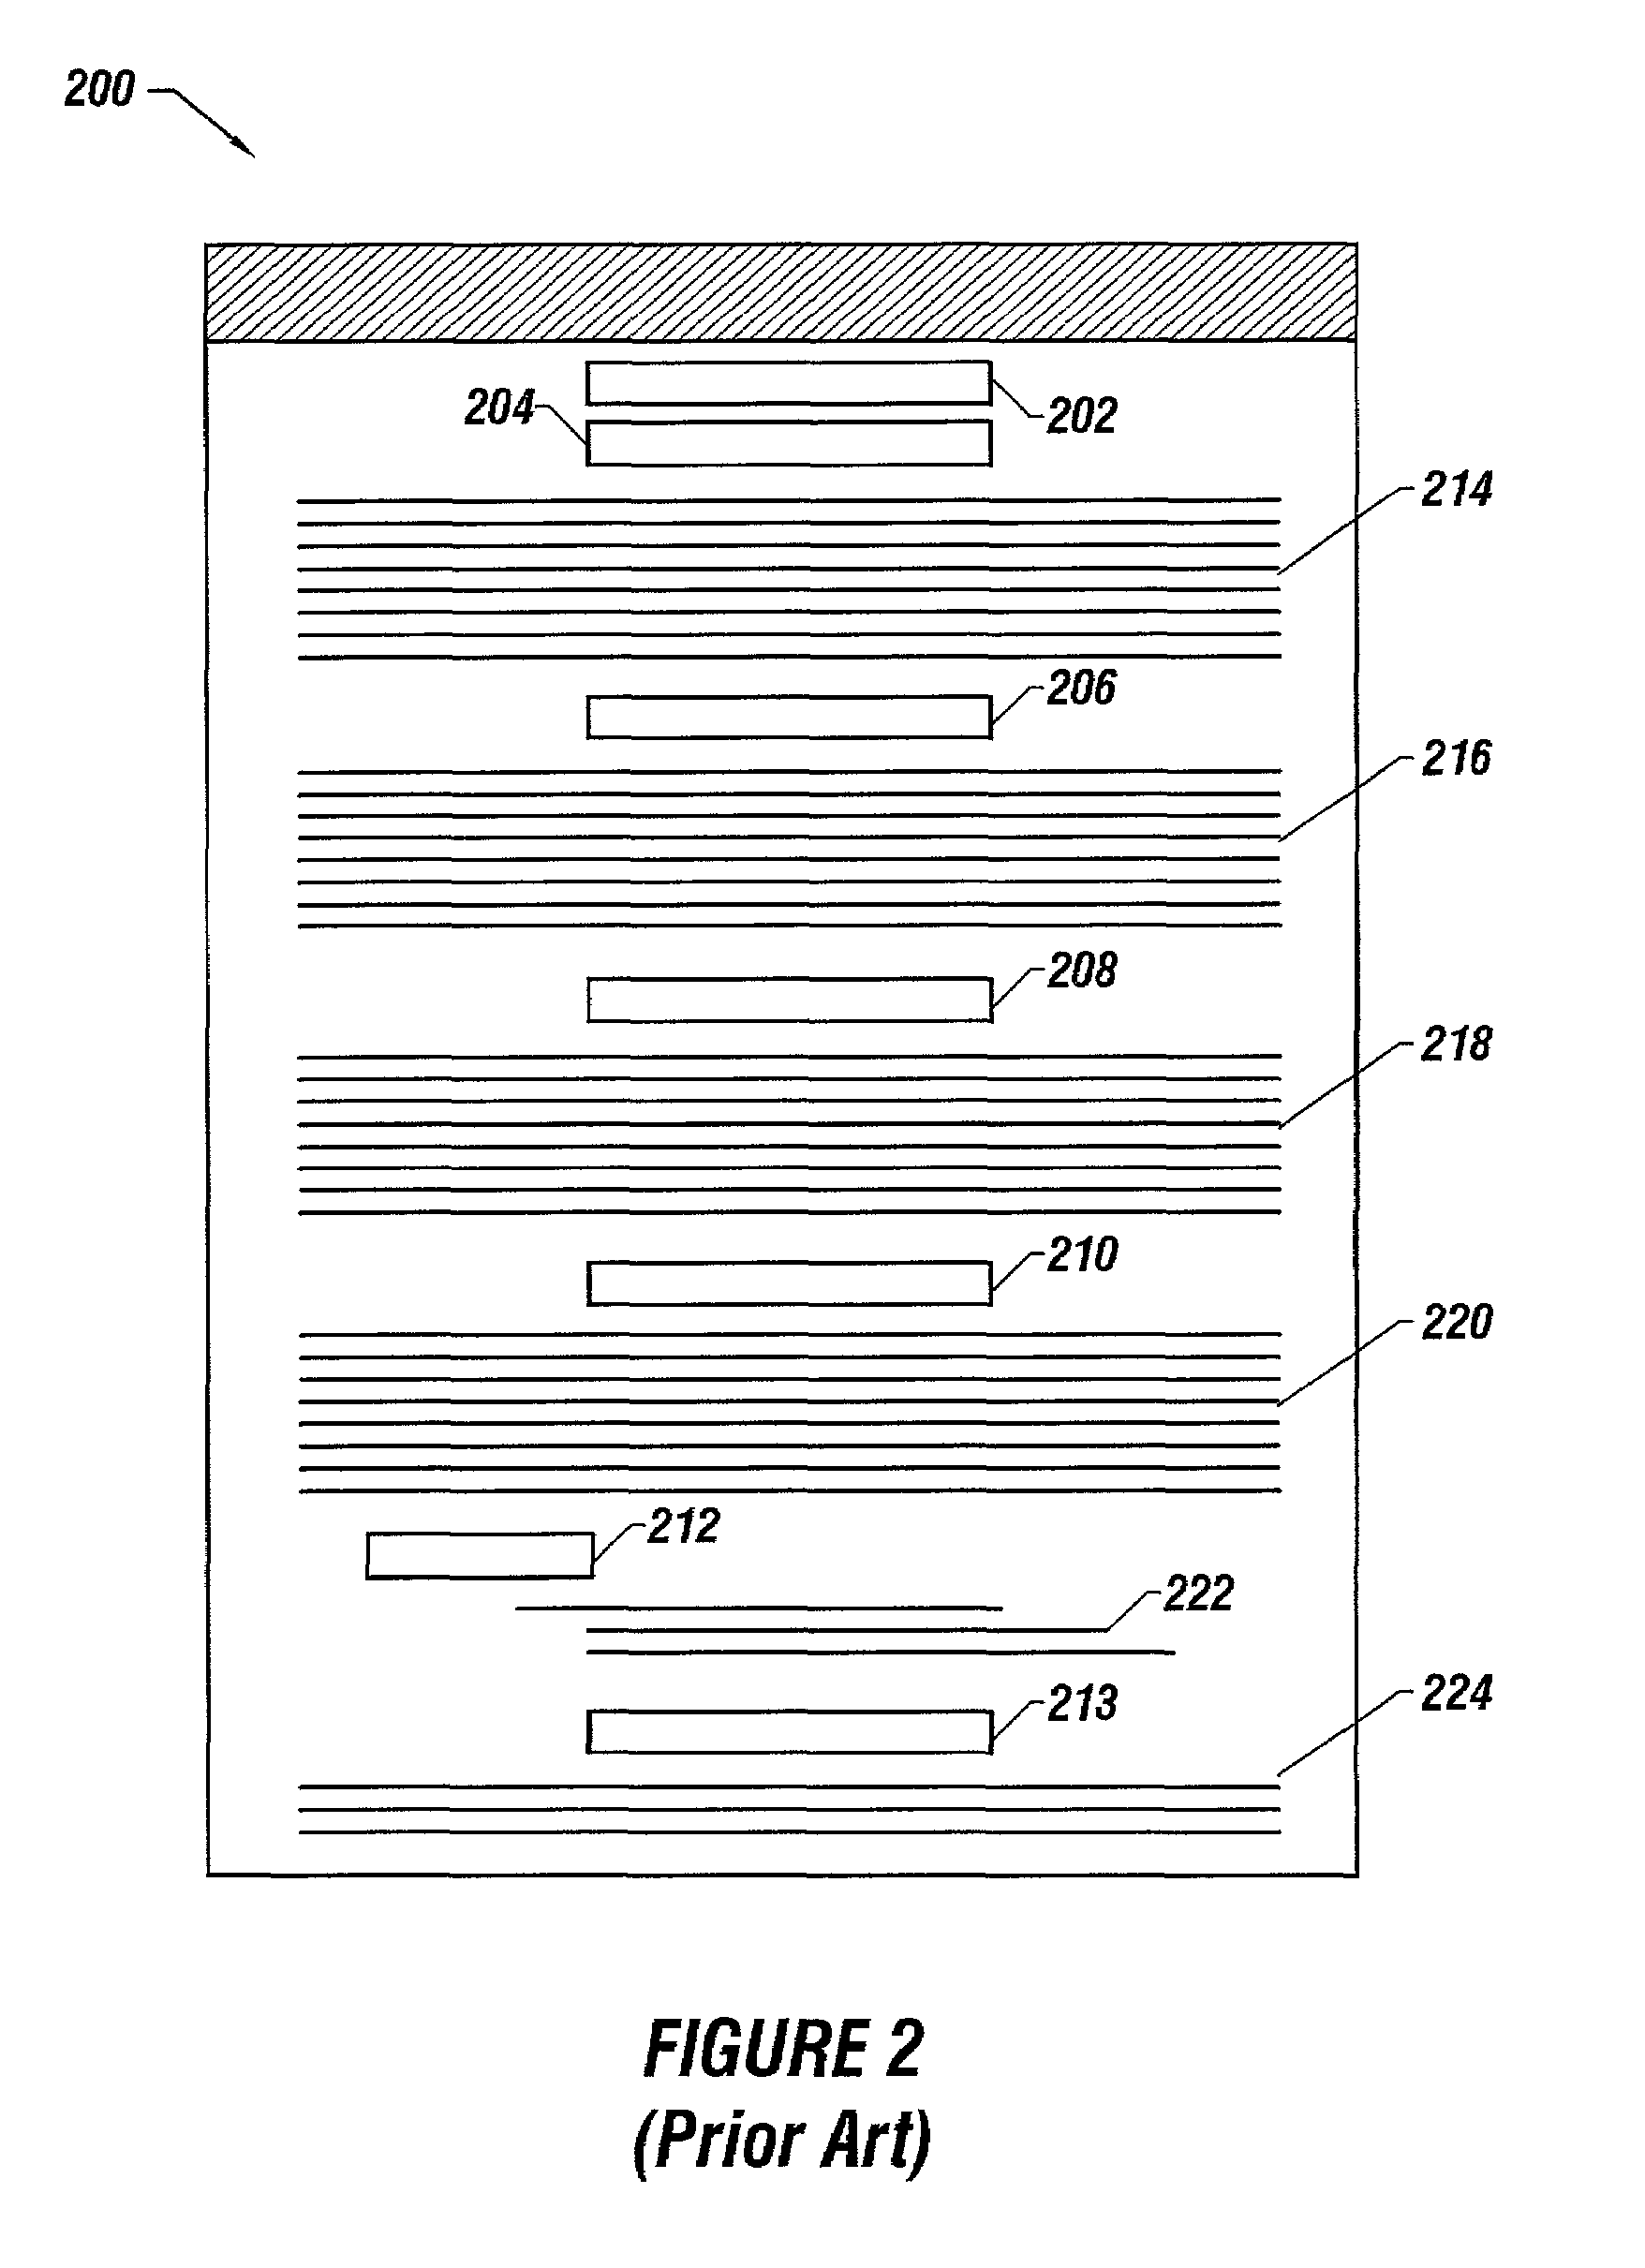 Method and apparatus for annotating a document